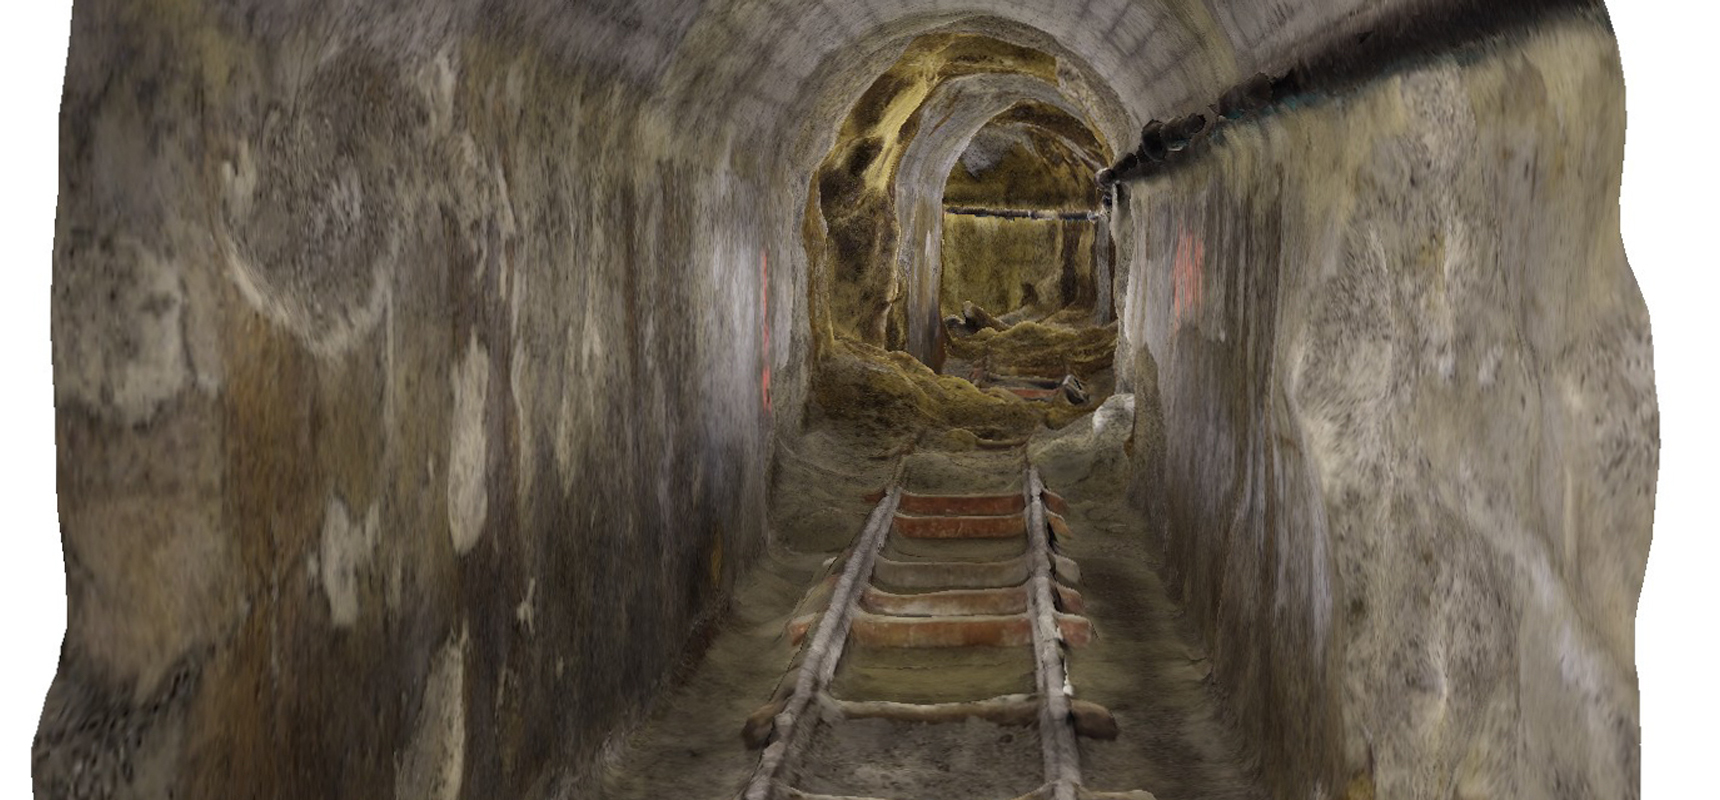 Vivaqua – Inspection of an old mine tunnel